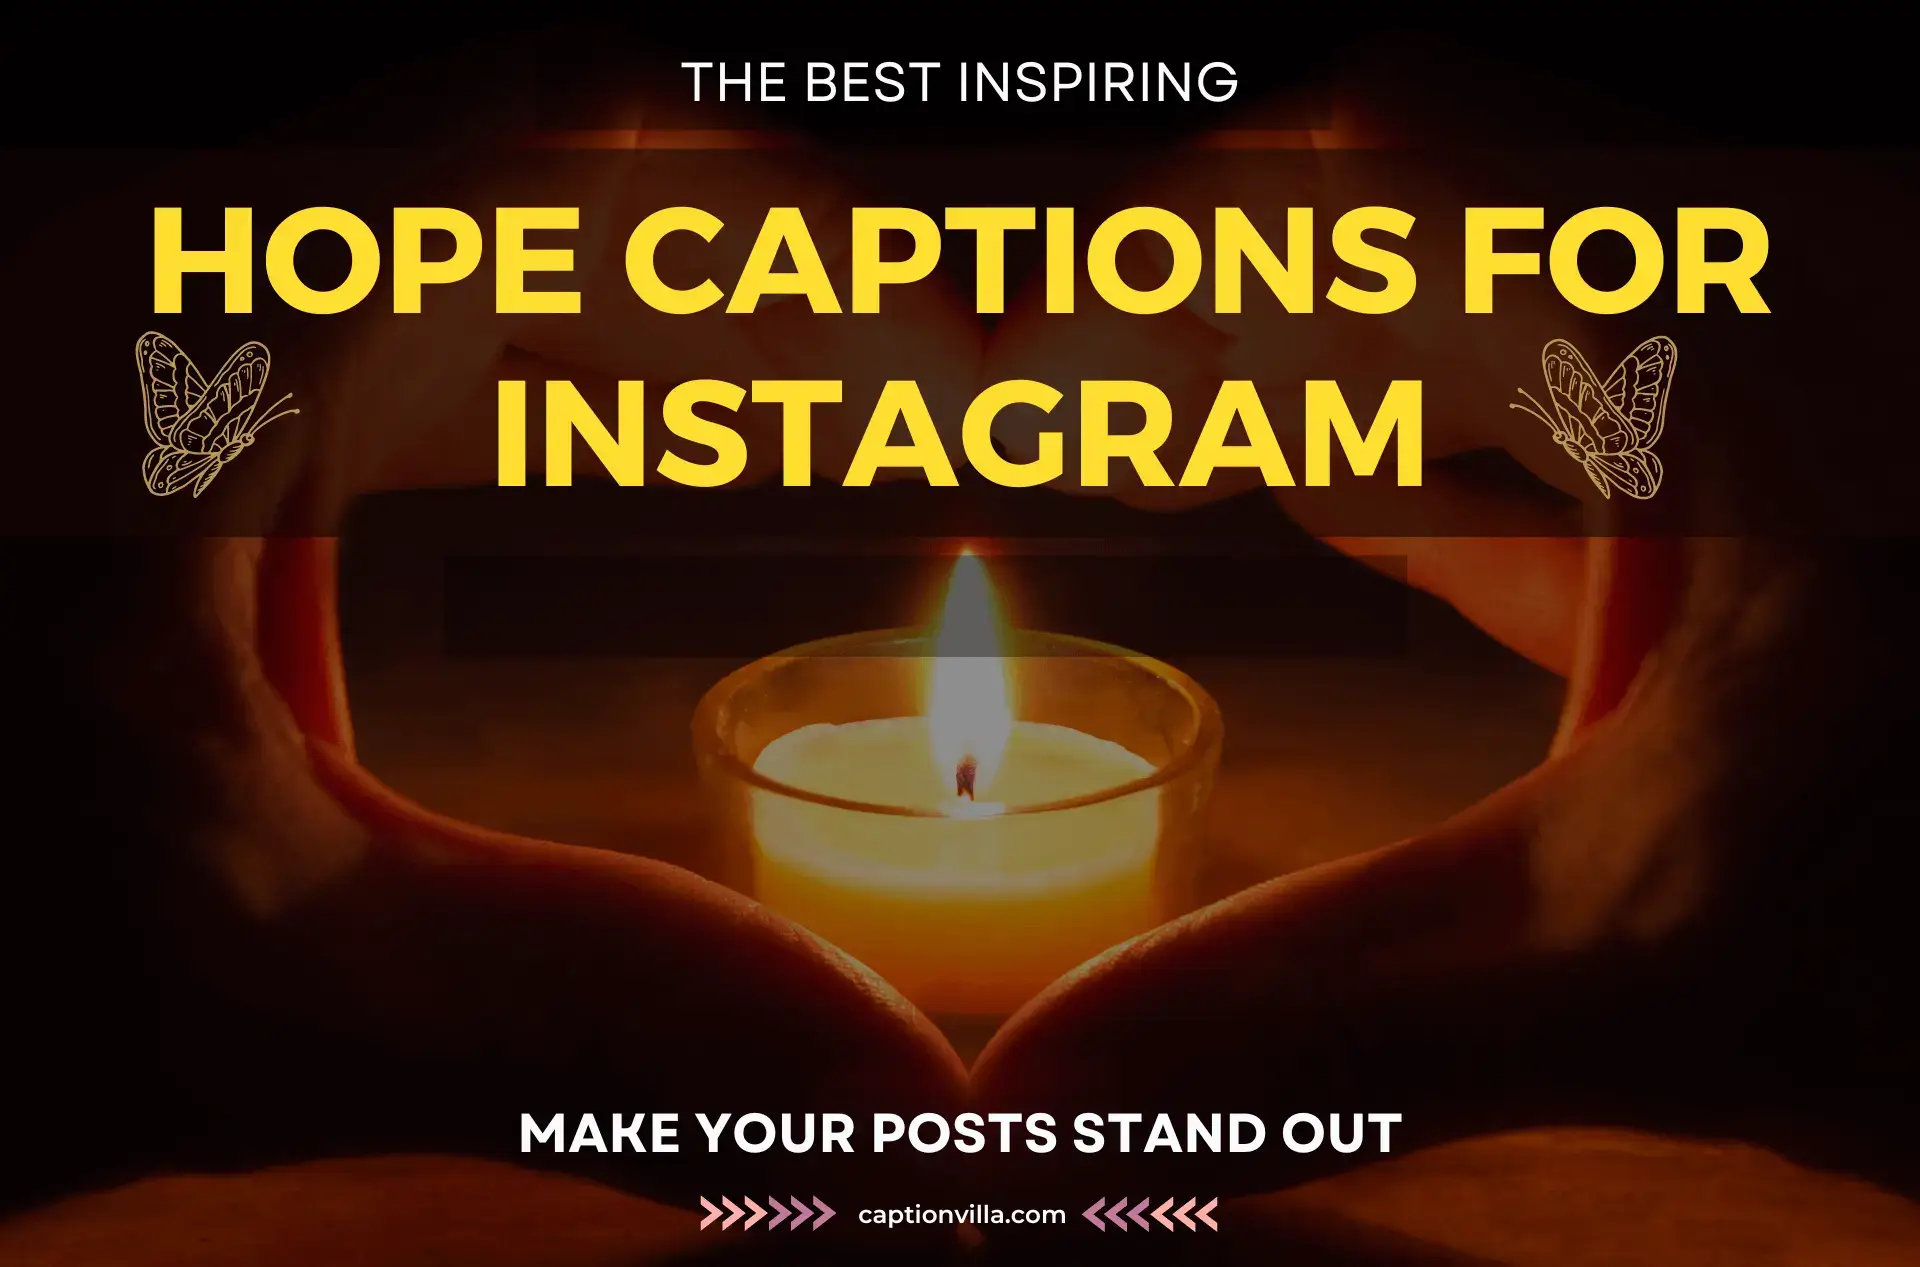 The Best Inspiring Hope Captions for Instagram With Quotes Spread Light and Love